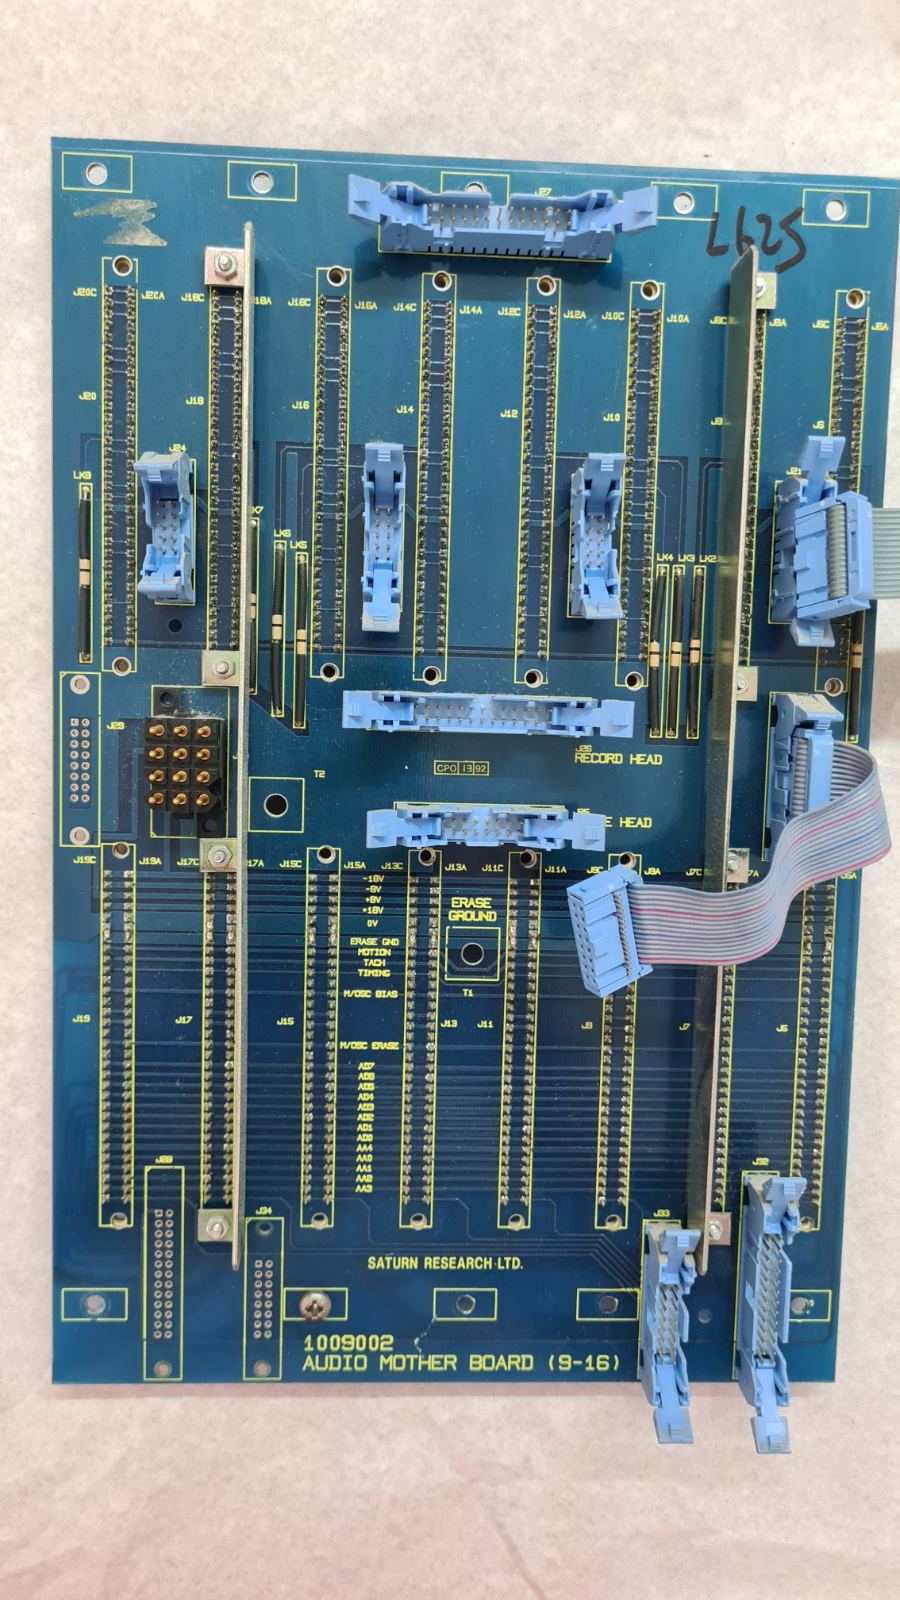 Saturn Research 624 audio mother board 9-16 1009002